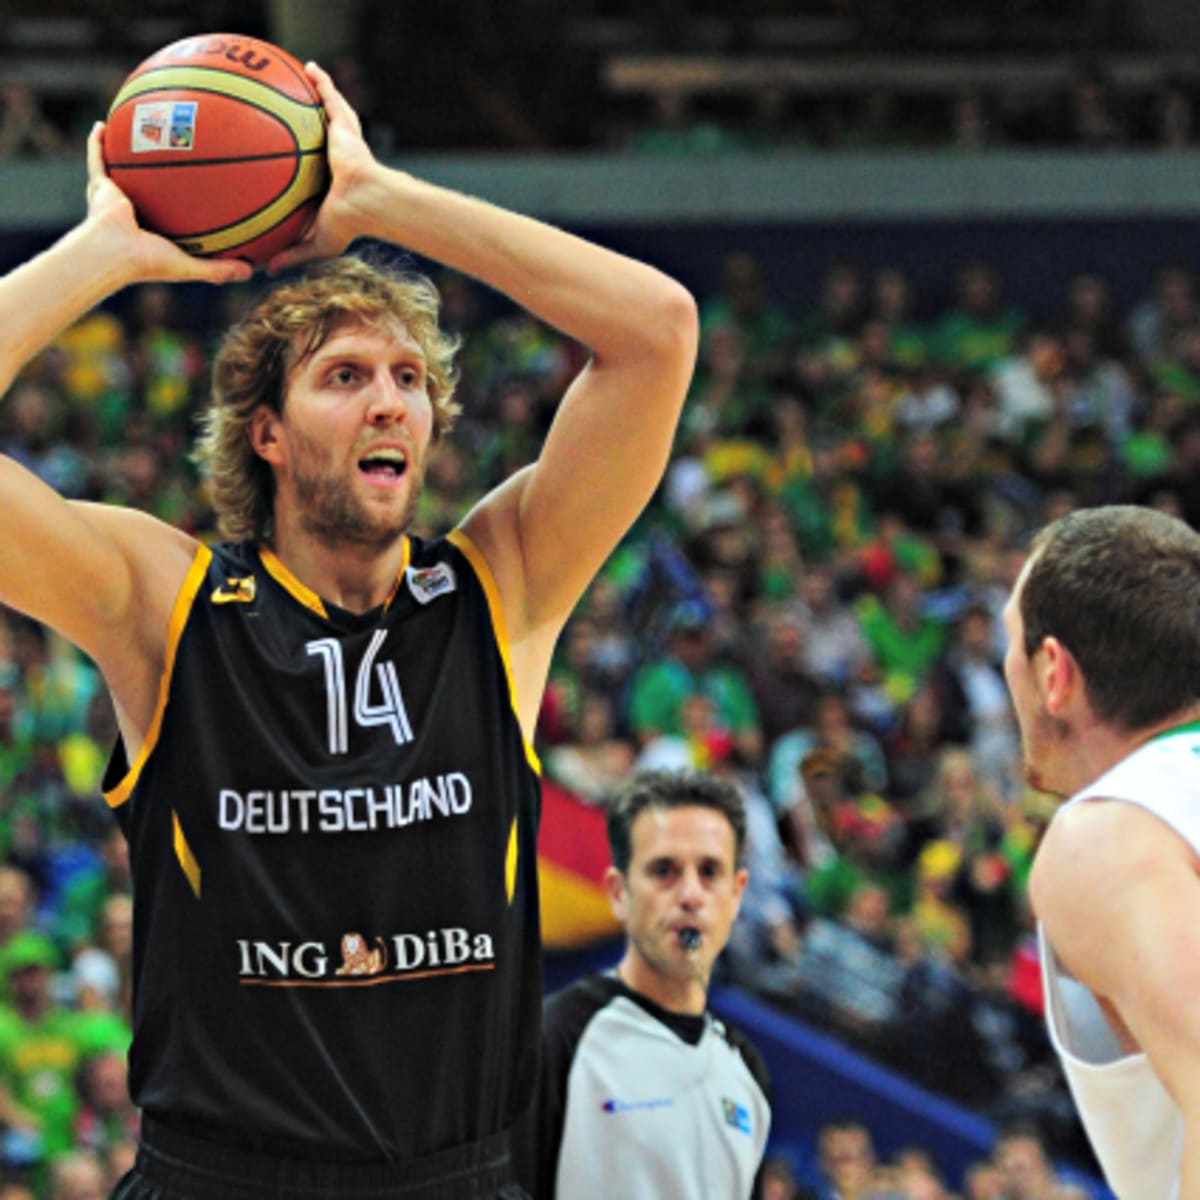 Dirk In Action For His National Team